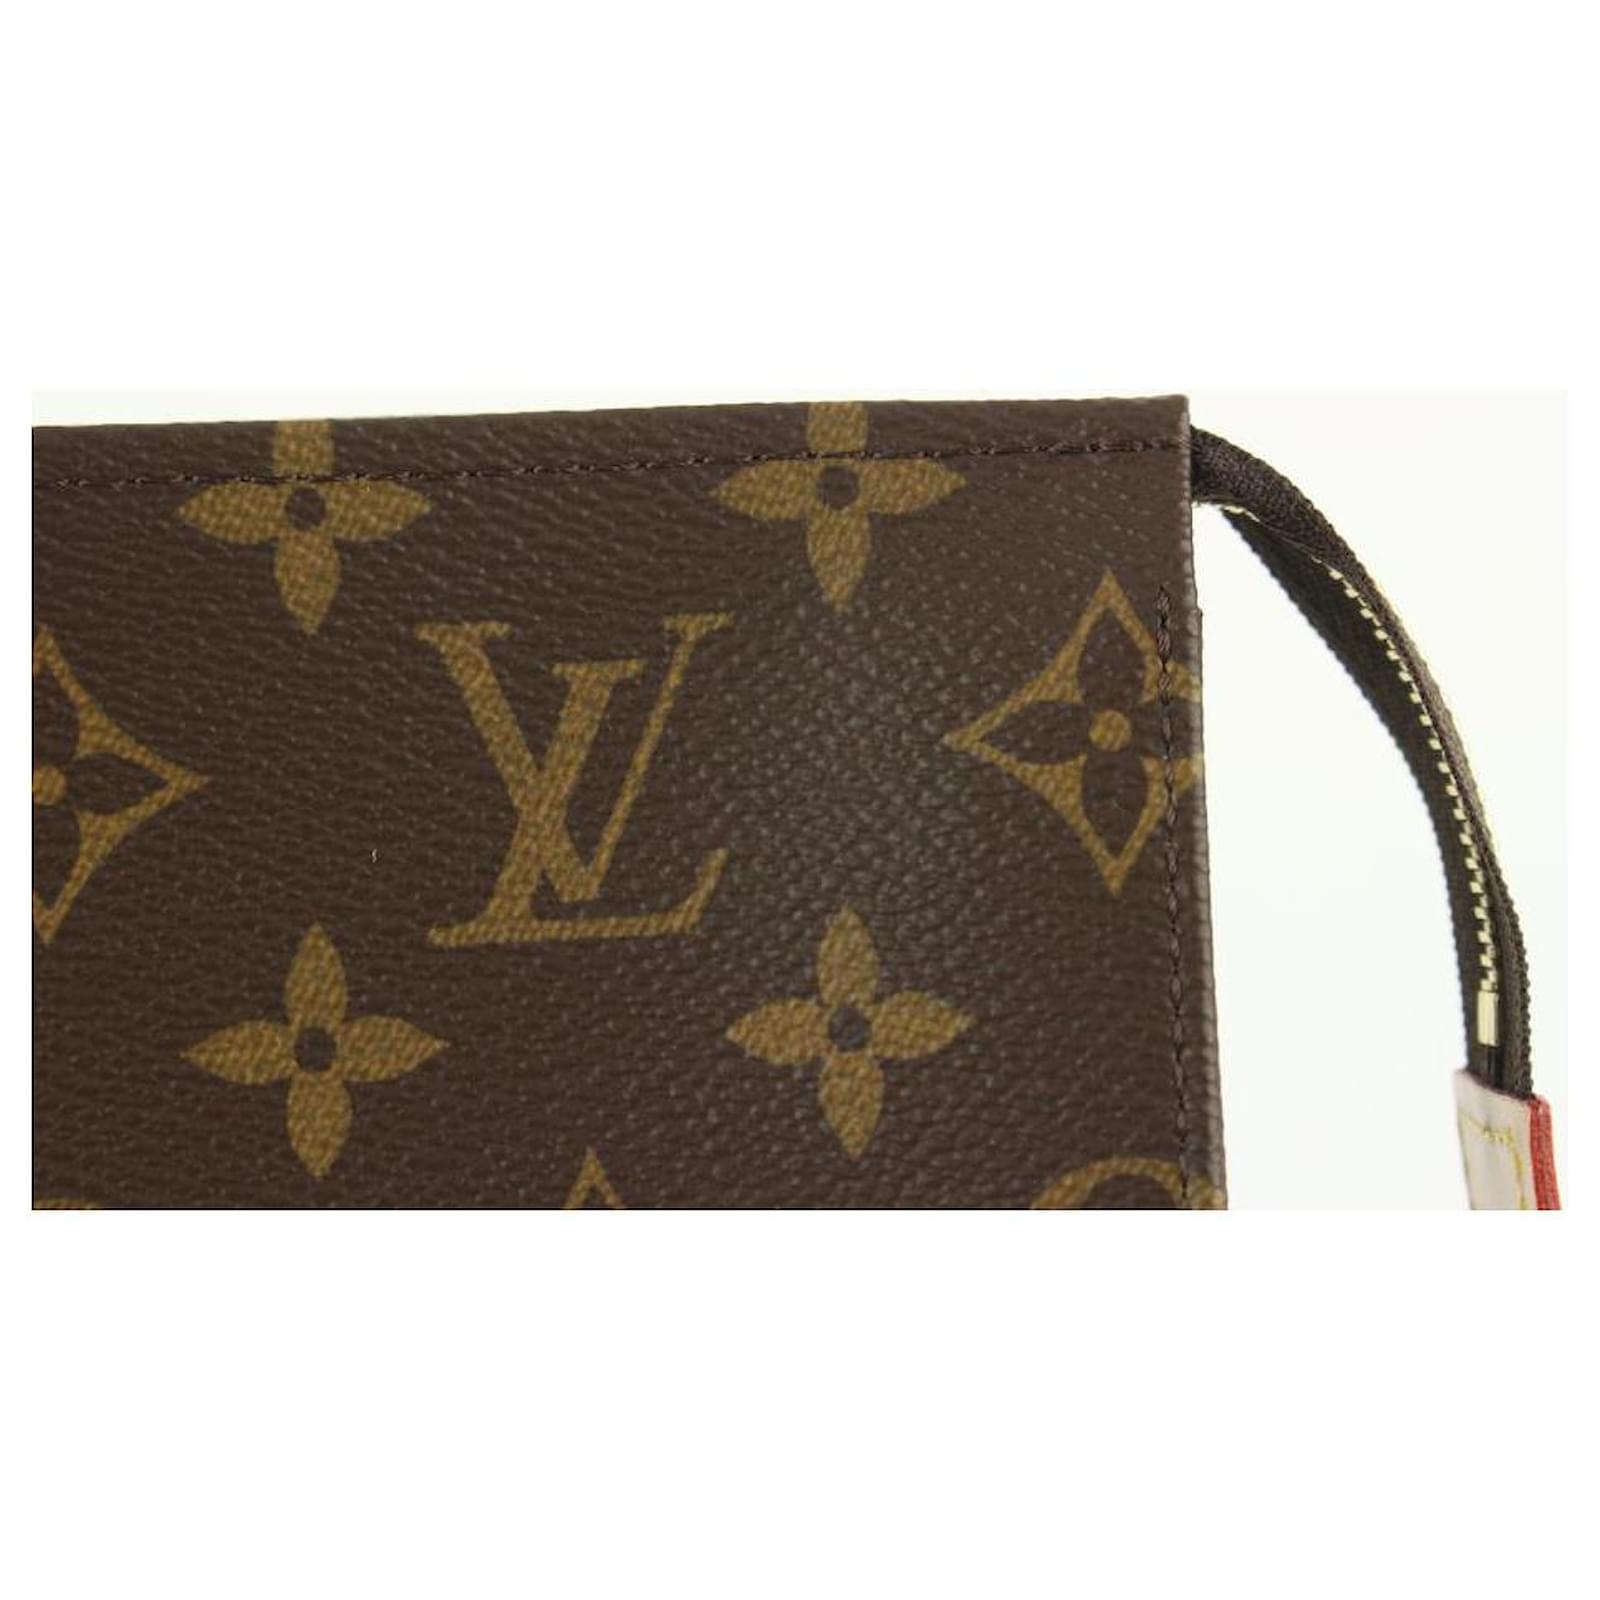 LOUIS VUITTON DISCONTINUED THE TOILETRY POUCH!!